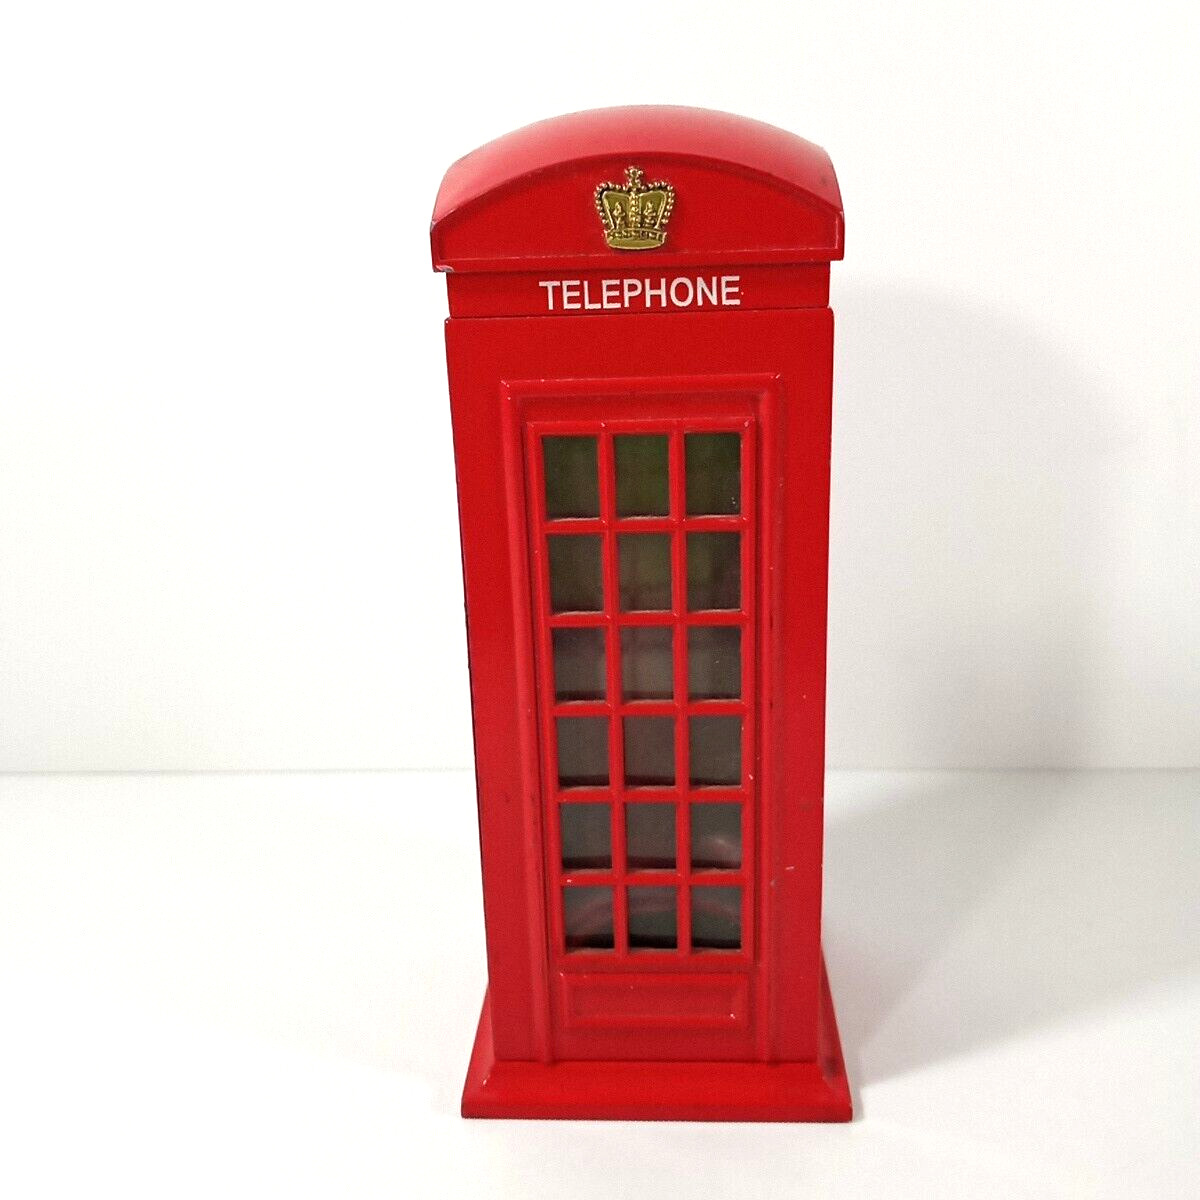 Die Cast Metal Telephone Phone Booth Red British London England Coin Piggy Bank